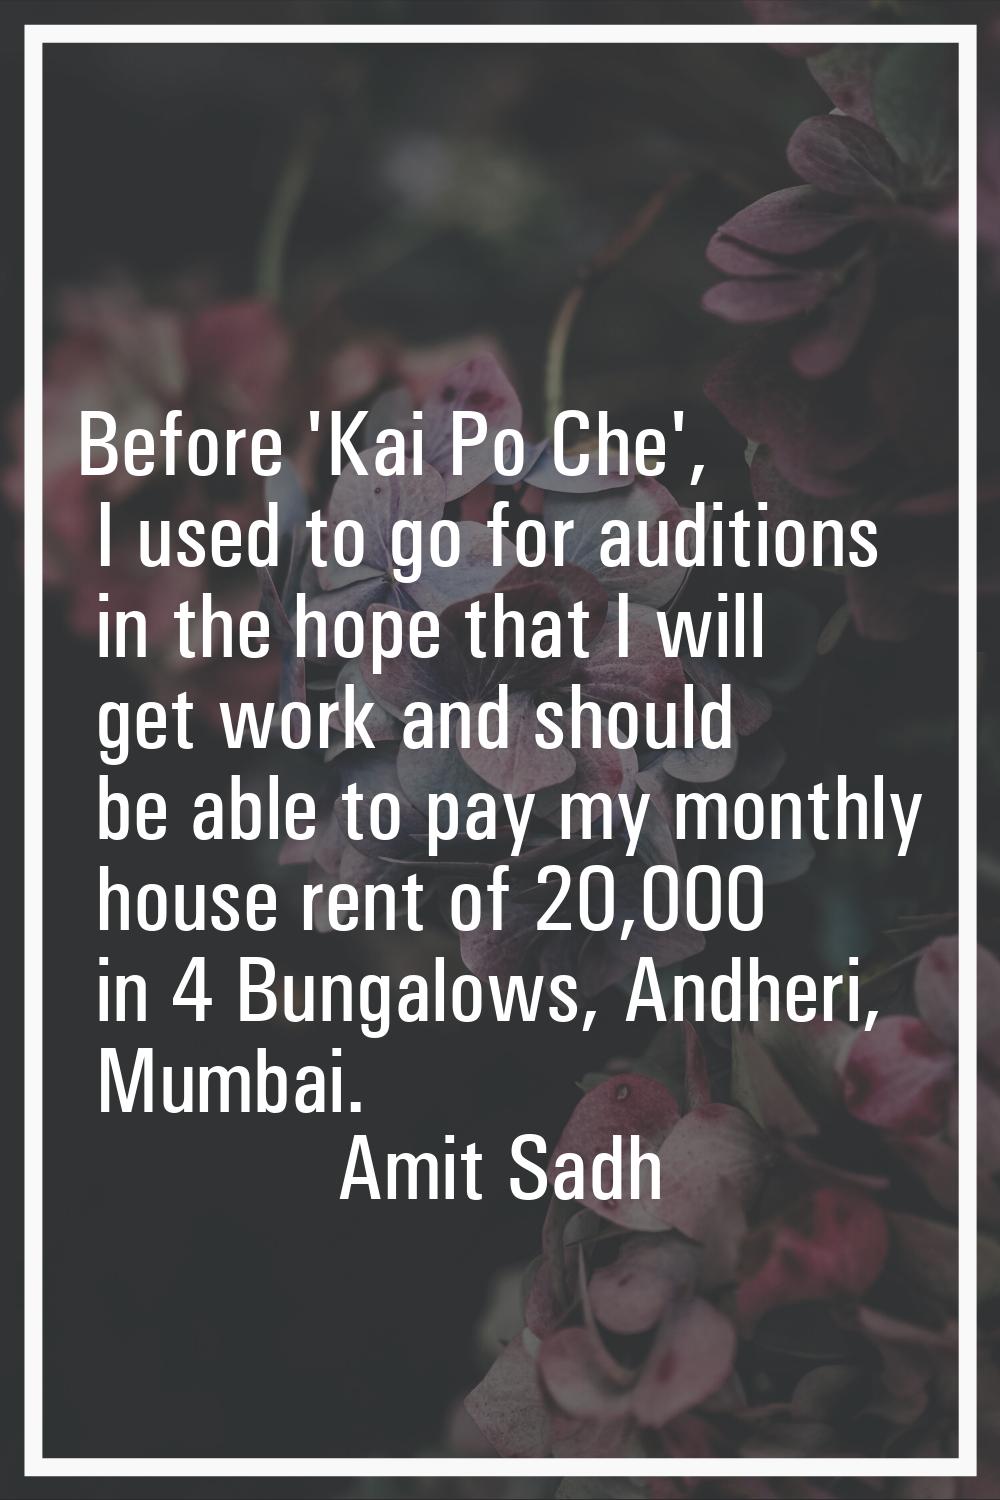 Before 'Kai Po Che', I used to go for auditions in the hope that I will get work and should be able